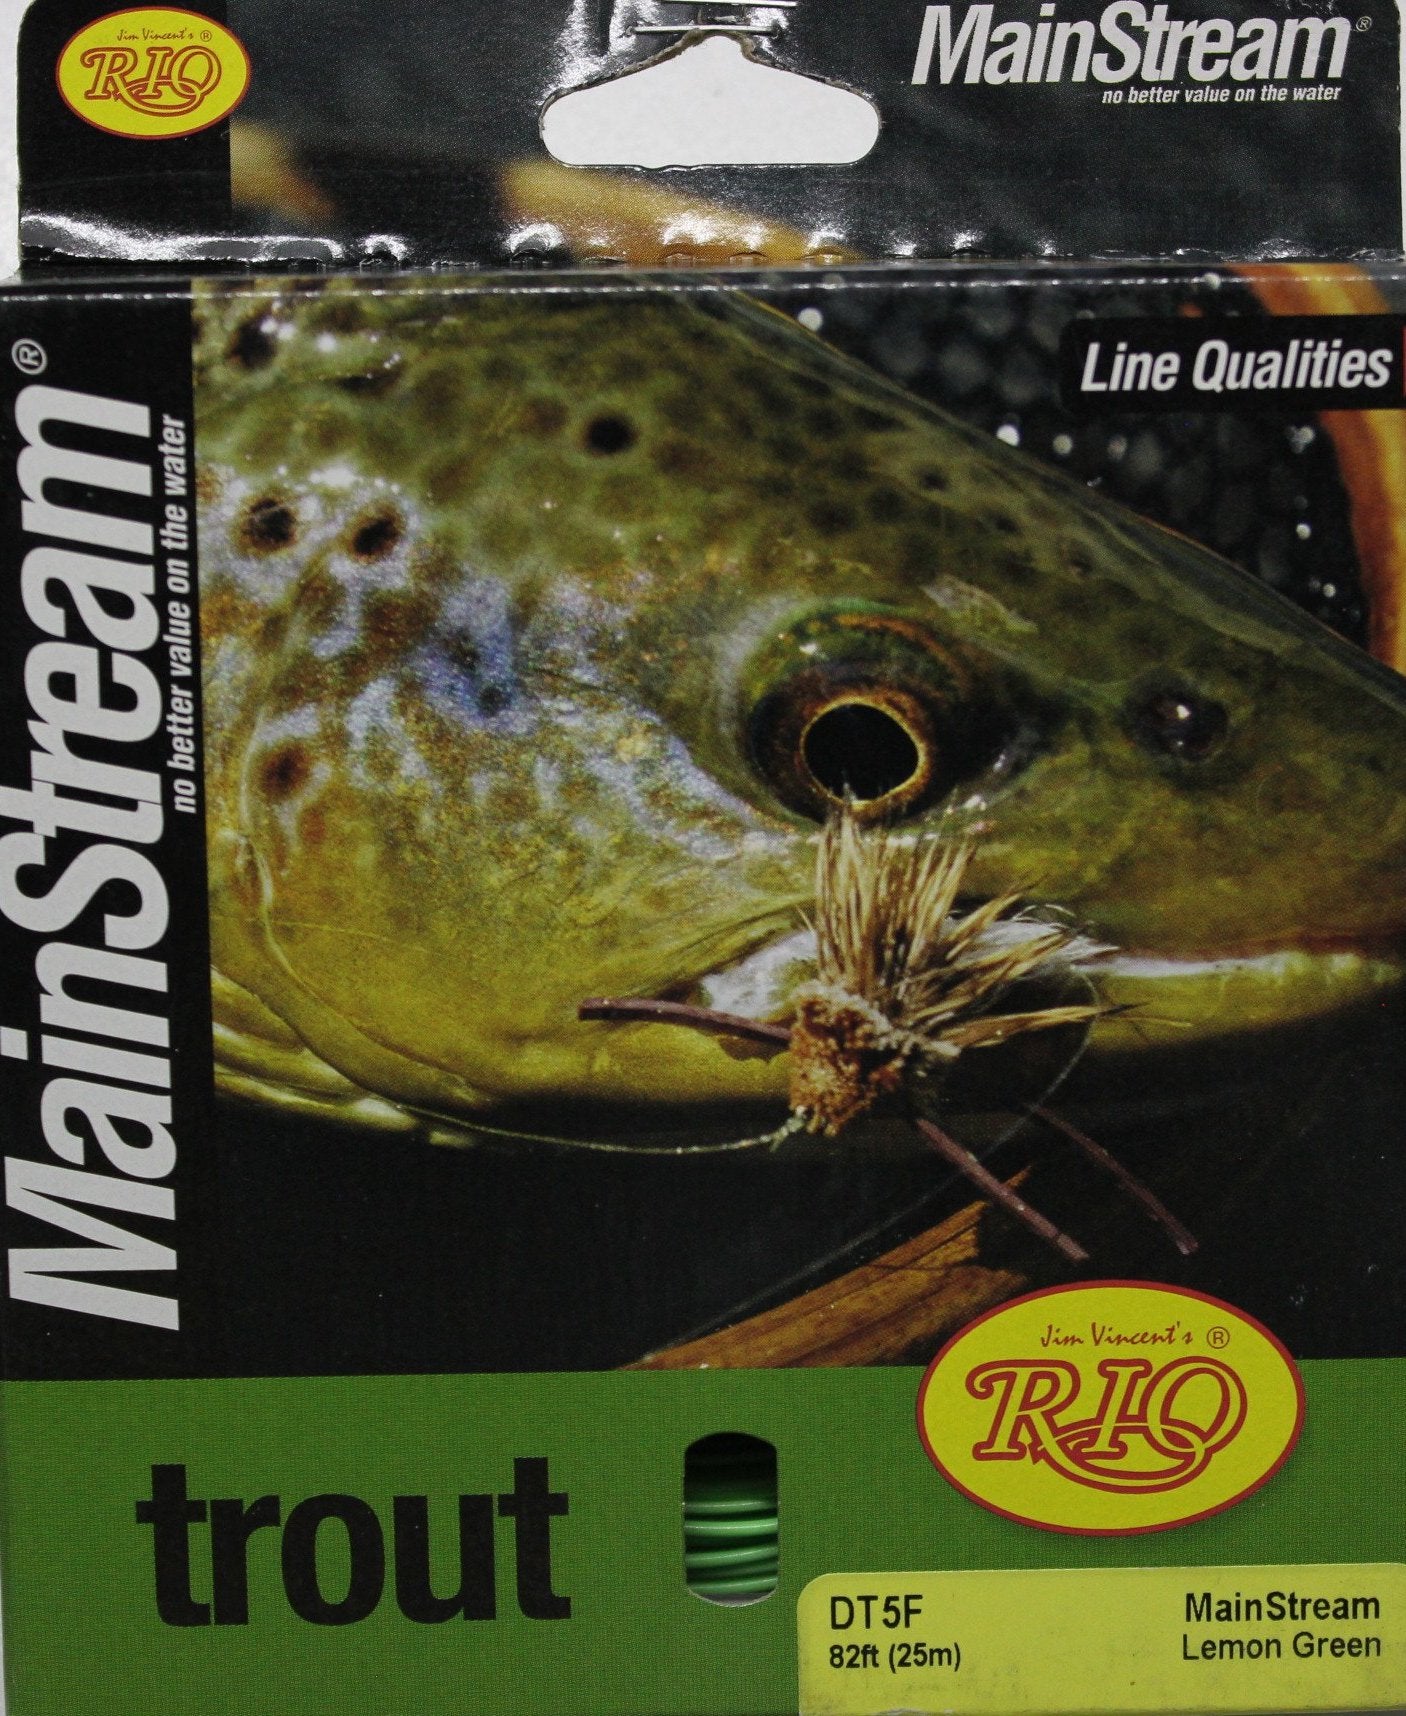 RIO Mainstream Trout Double Tapper Fly Line – Ultimate Fishing and